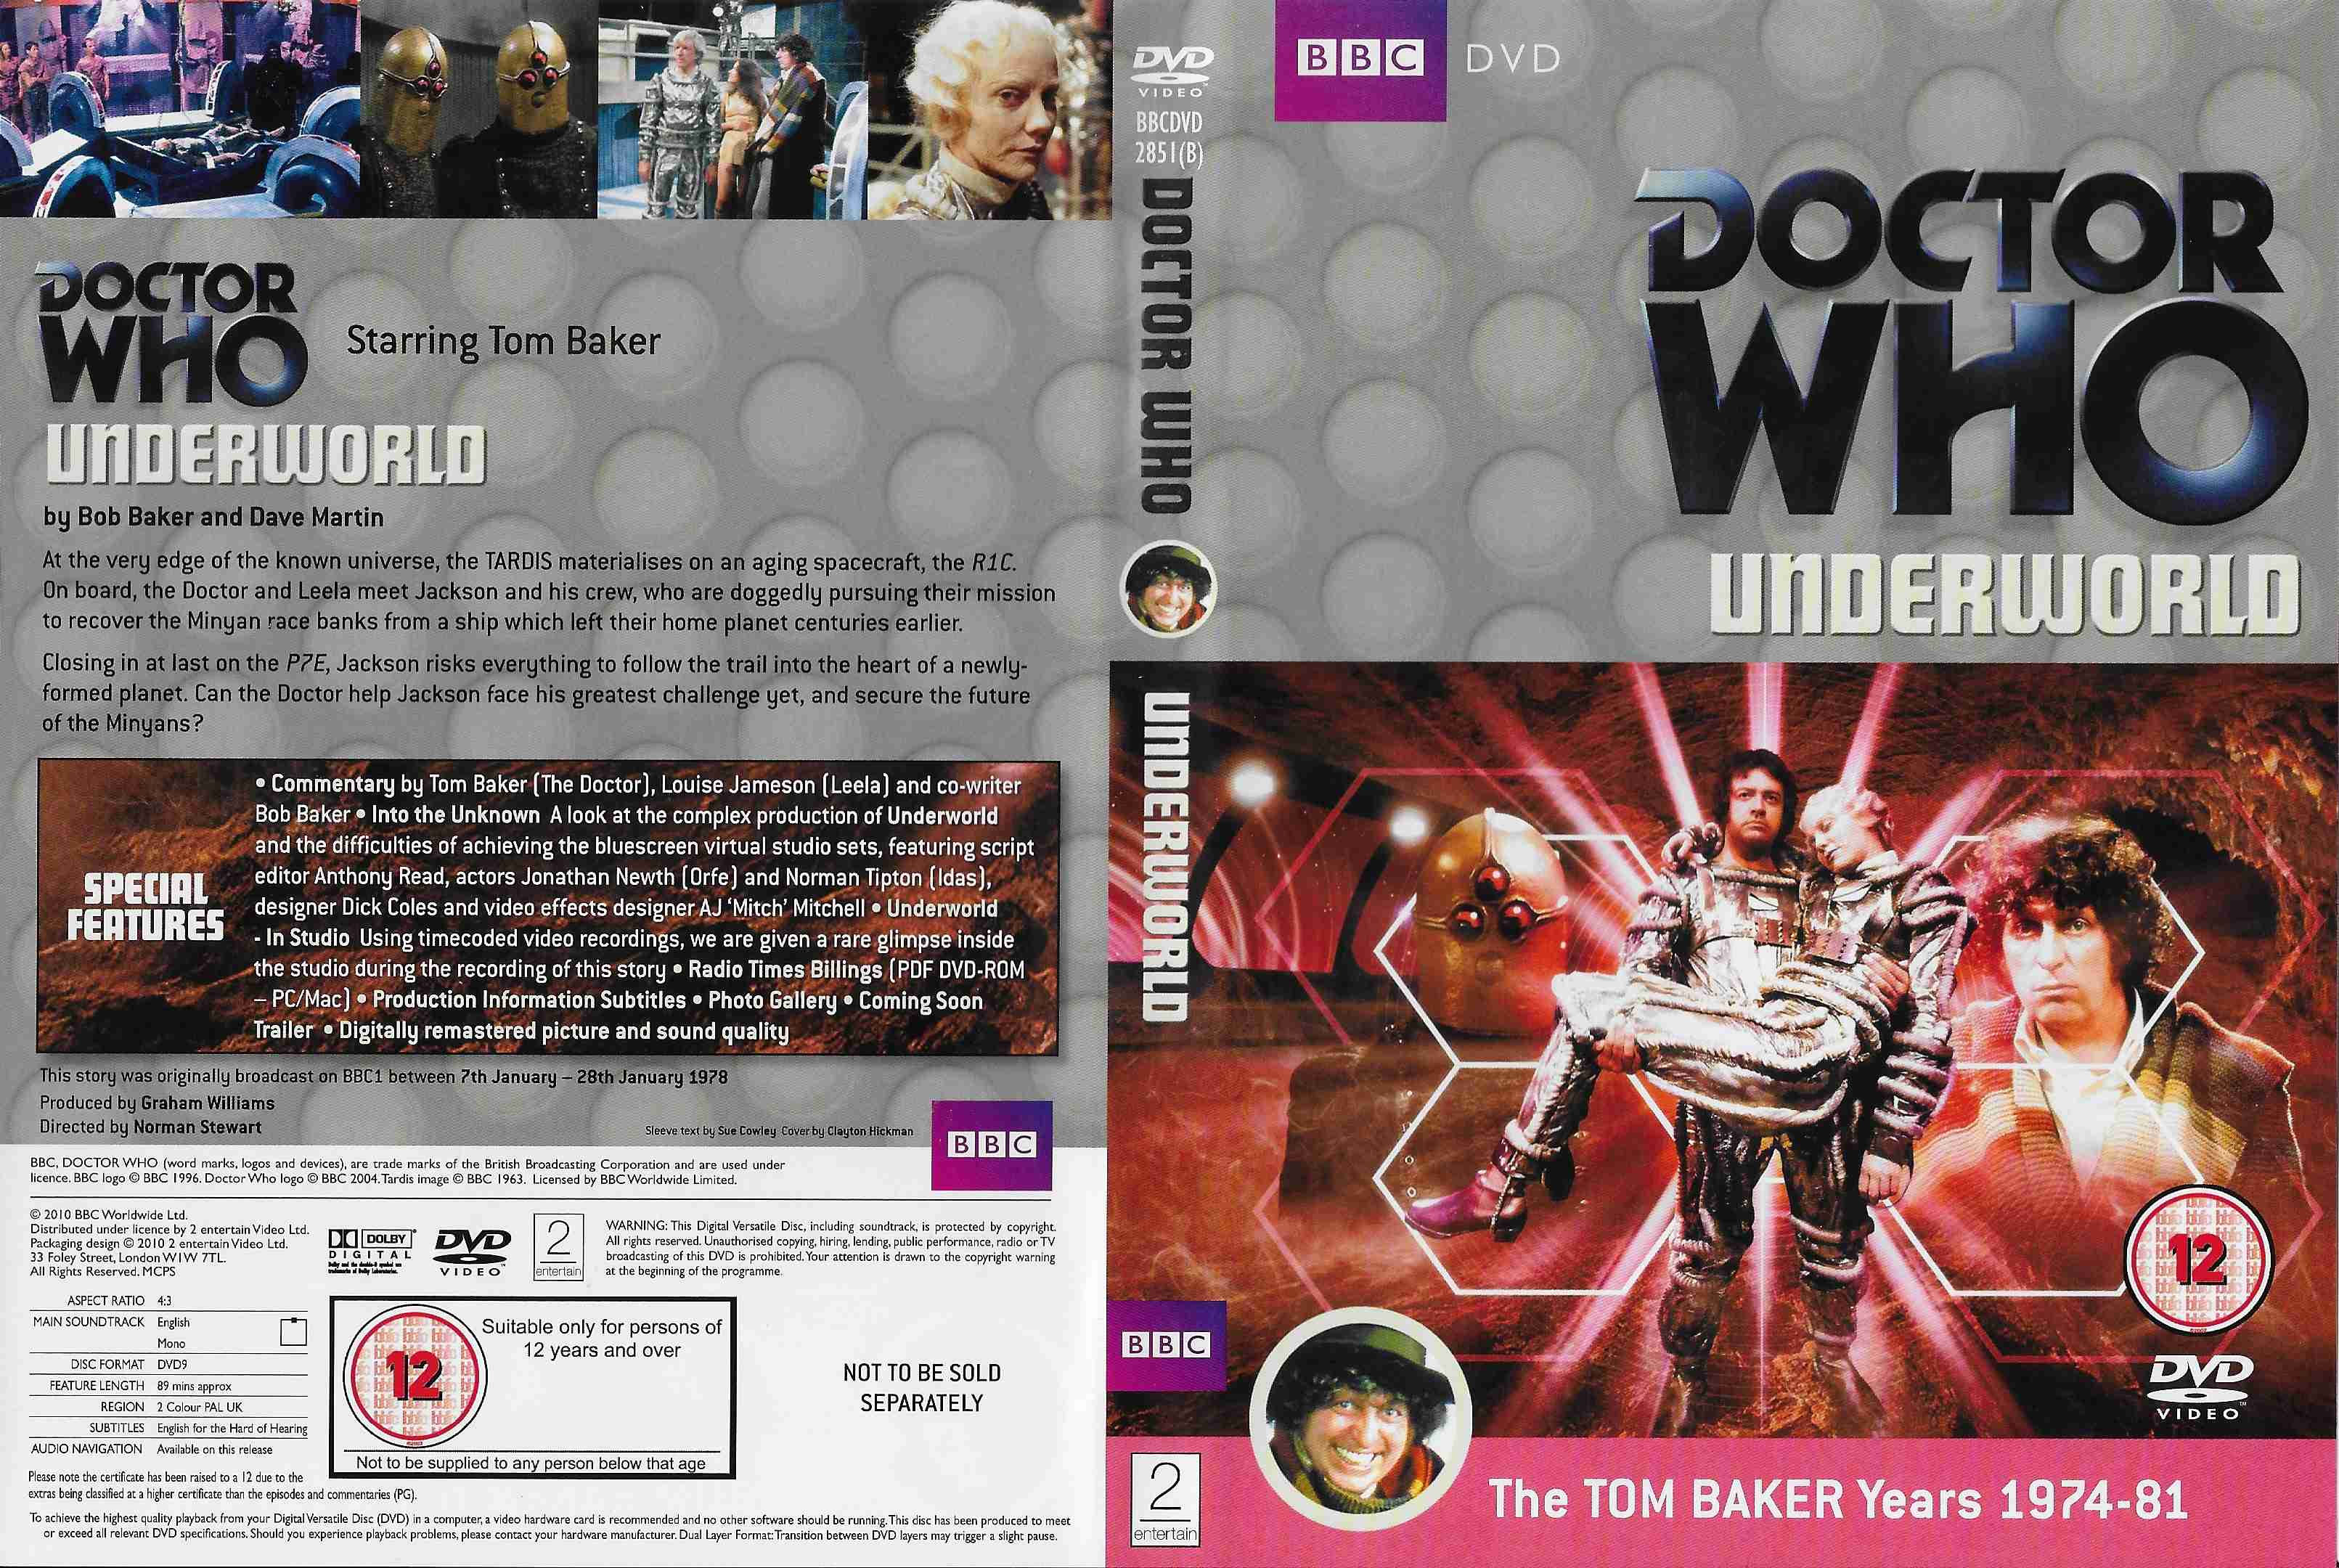 Picture of BBCDVD 2851B Doctor Who - Underworld by artist Bob Baker / Dave Martin from the BBC records and Tapes library